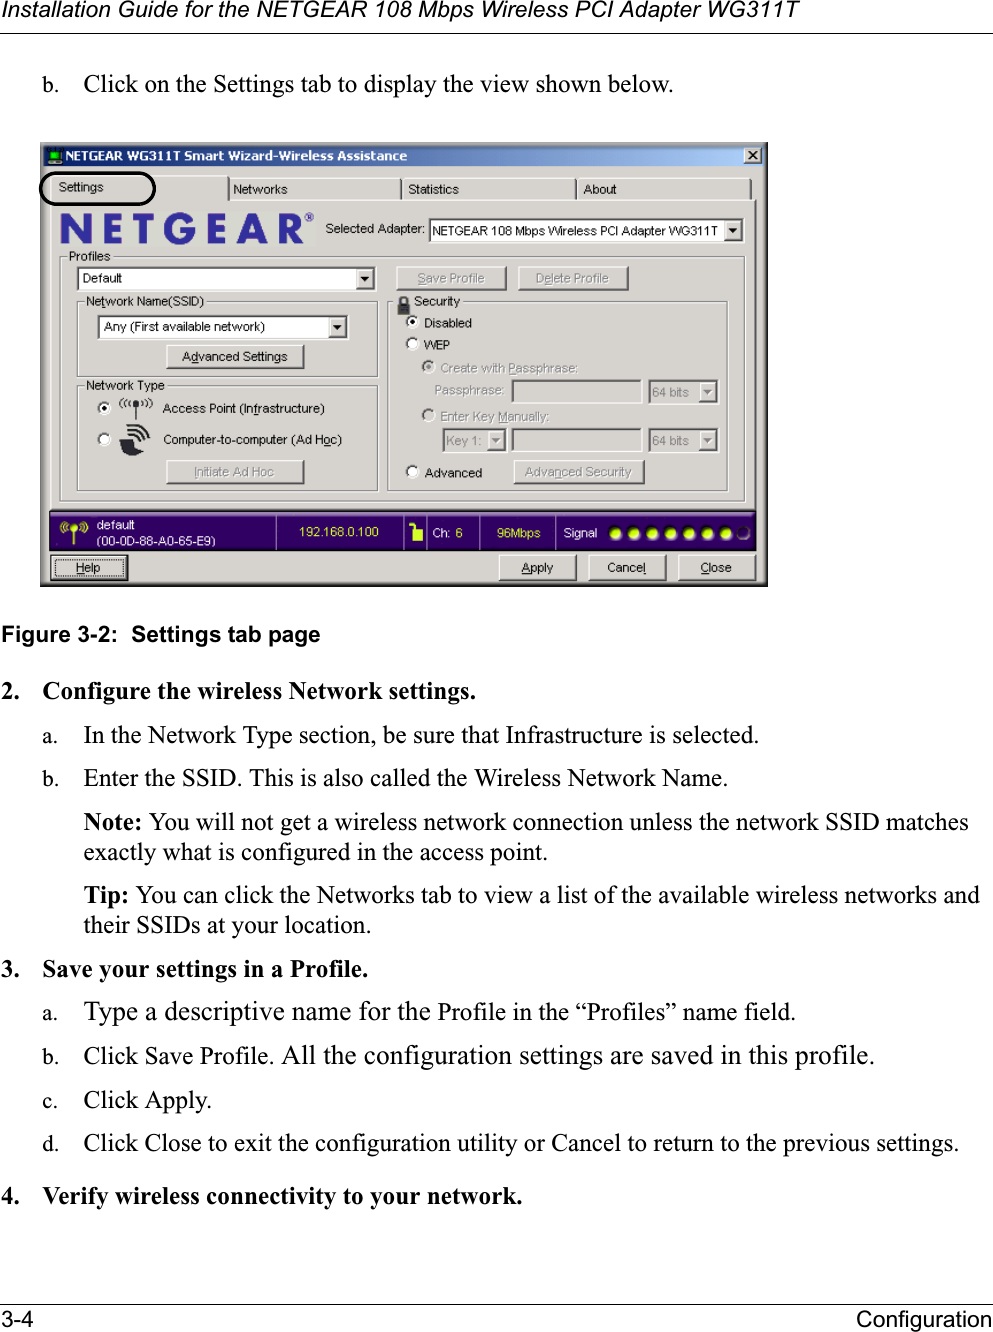 Installation Guide for the NETGEAR 108 Mbps Wireless PCI Adapter WG311T3-4 Configurationb. Click on the Settings tab to display the view shown below. Figure 3-2:  Settings tab page2. Configure the wireless Network settings. a. In the Network Type section, be sure that Infrastructure is selected.b. Enter the SSID. This is also called the Wireless Network Name.Note: You will not get a wireless network connection unless the network SSID matches exactly what is configured in the access point. Tip: You can click the Networks tab to view a list of the available wireless networks and their SSIDs at your location. 3. Save your settings in a Profile. a. Type a descriptive name for the Profile in the “Profiles” name field.b. Click Save Profile. All the configuration settings are saved in this profile.c. Click Apply.d. Click Close to exit the configuration utility or Cancel to return to the previous settings.4. Verify wireless connectivity to your network.